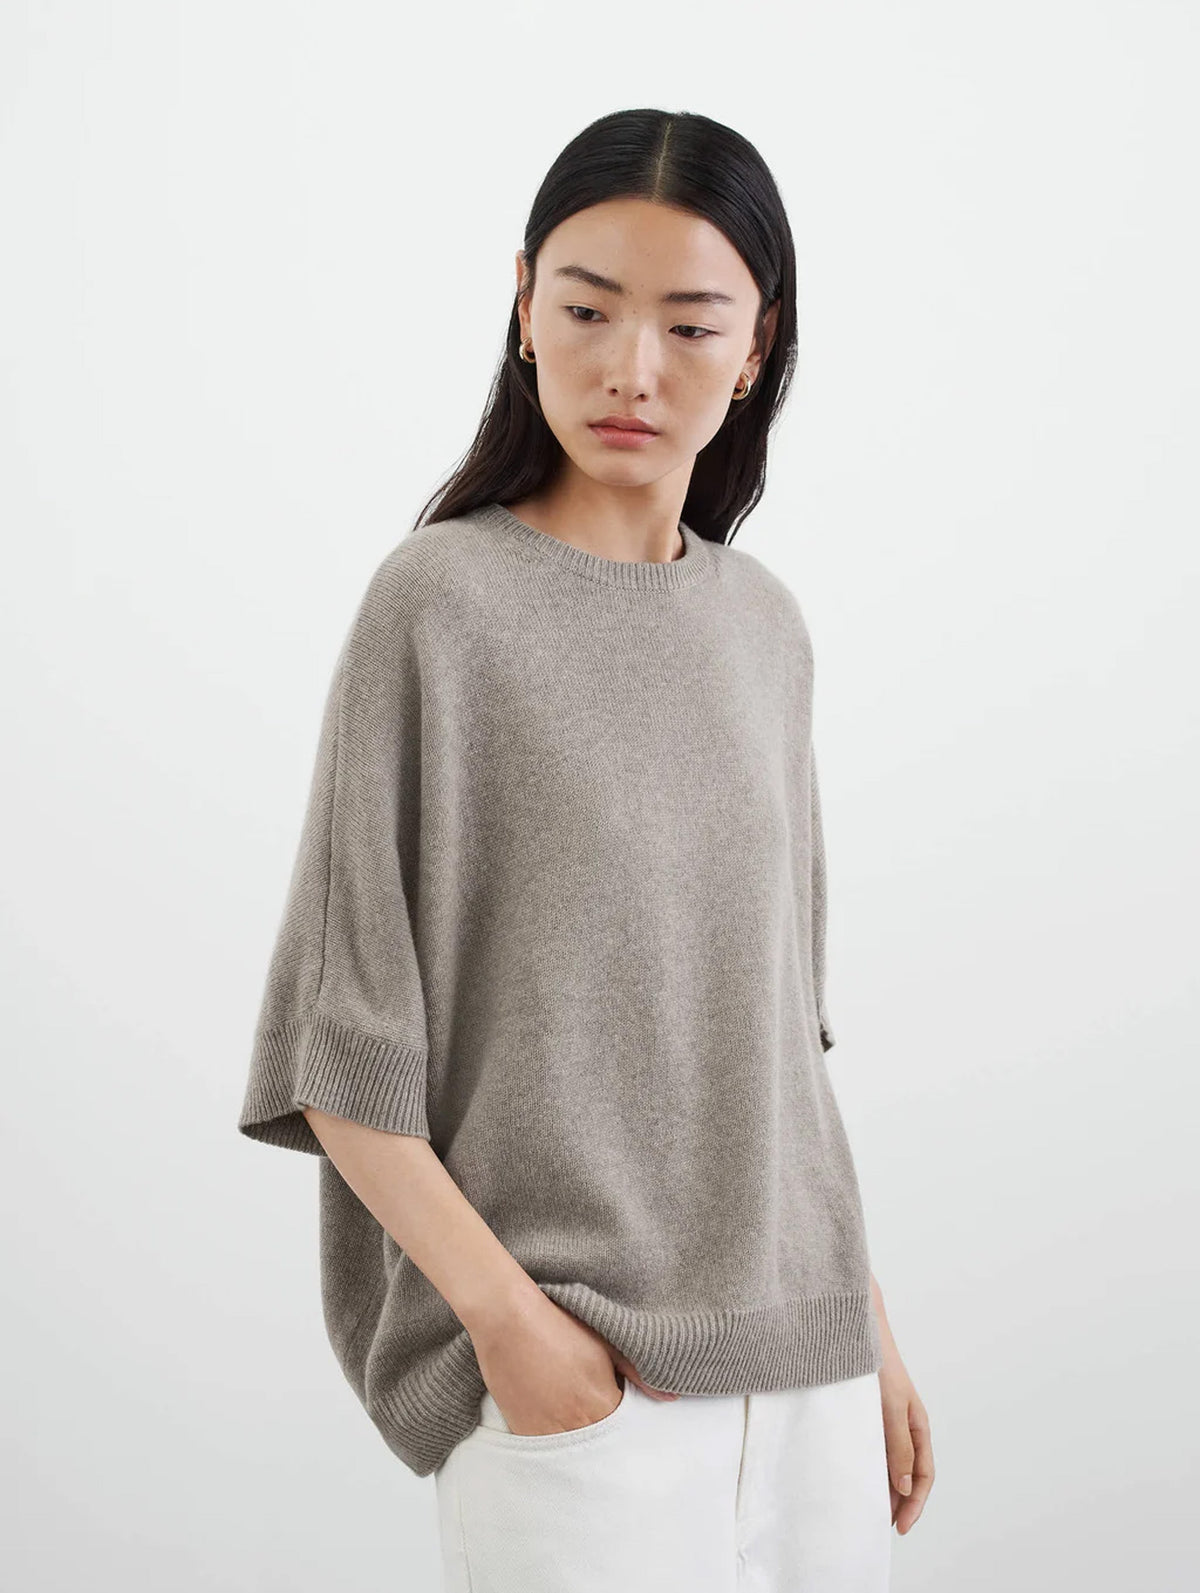 Short Sleeve Cashmere Top in Greige